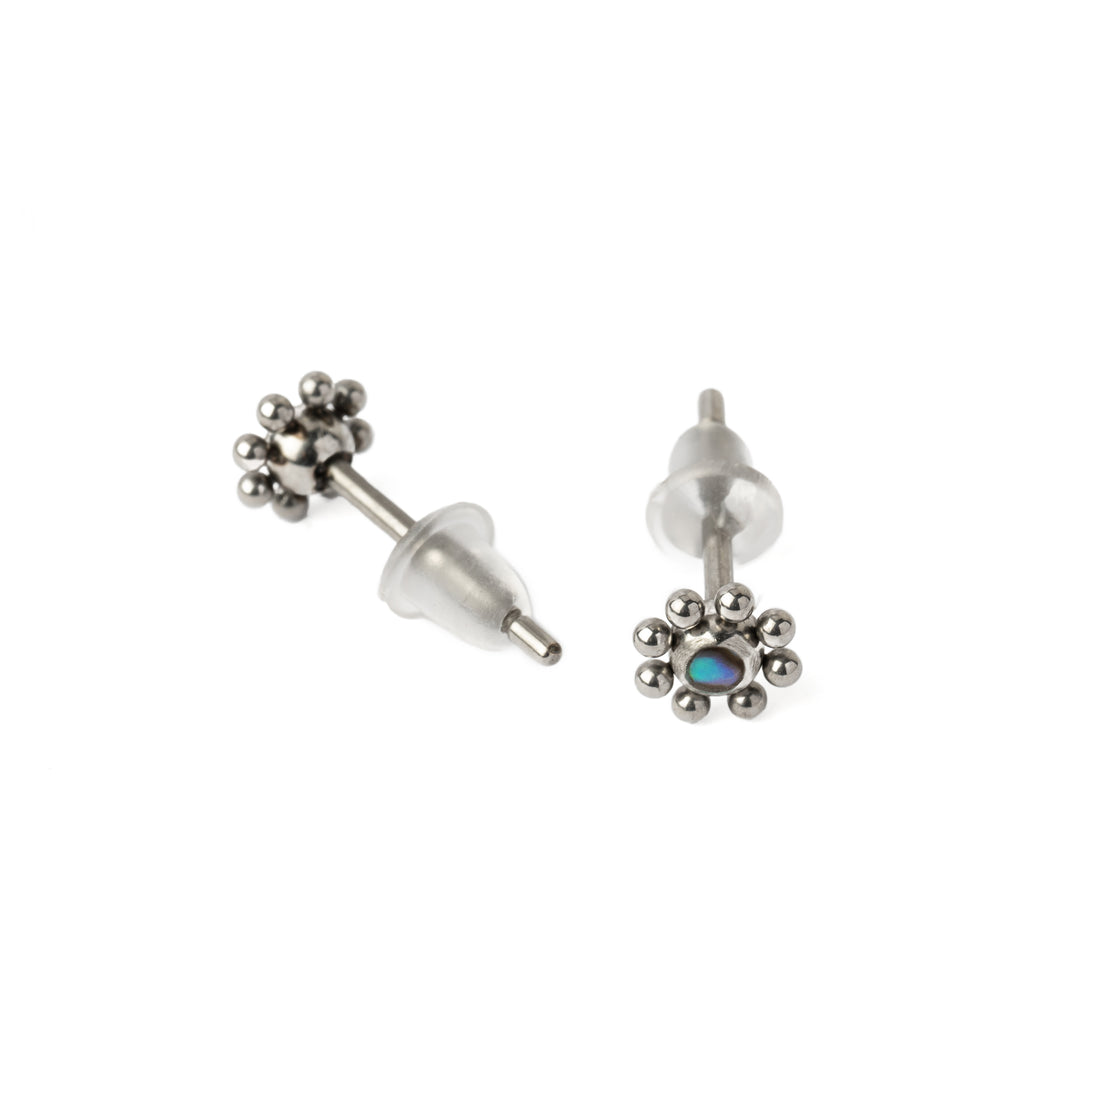 Daisy Abalone Ear Studs front and back view